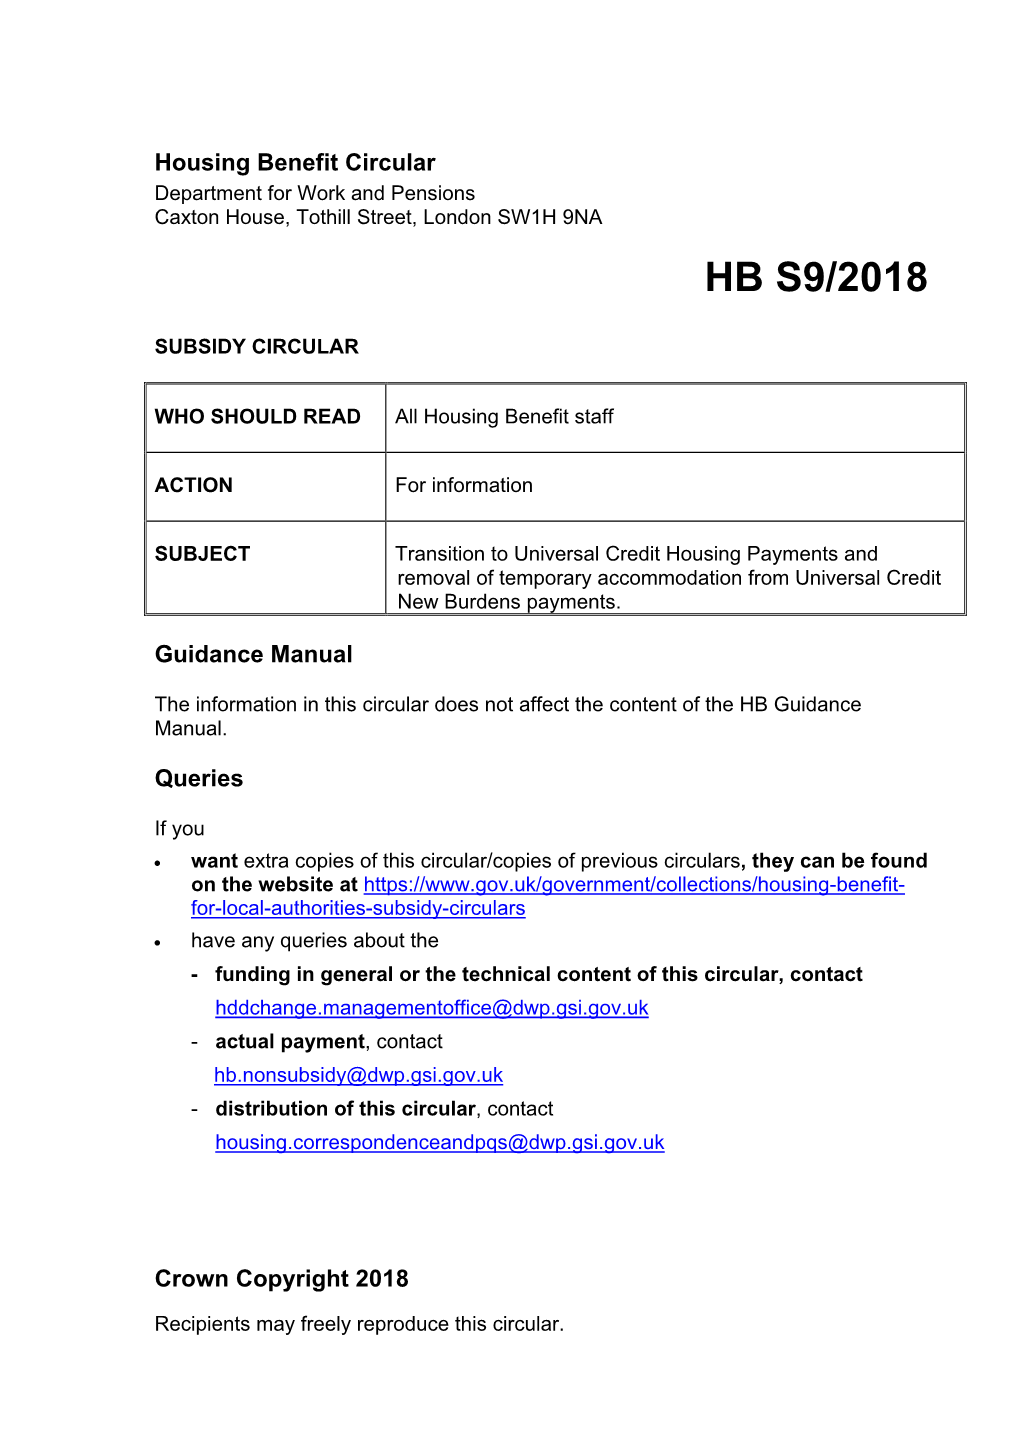 S9/2018 Transition to Universal Credit Housing Payments And